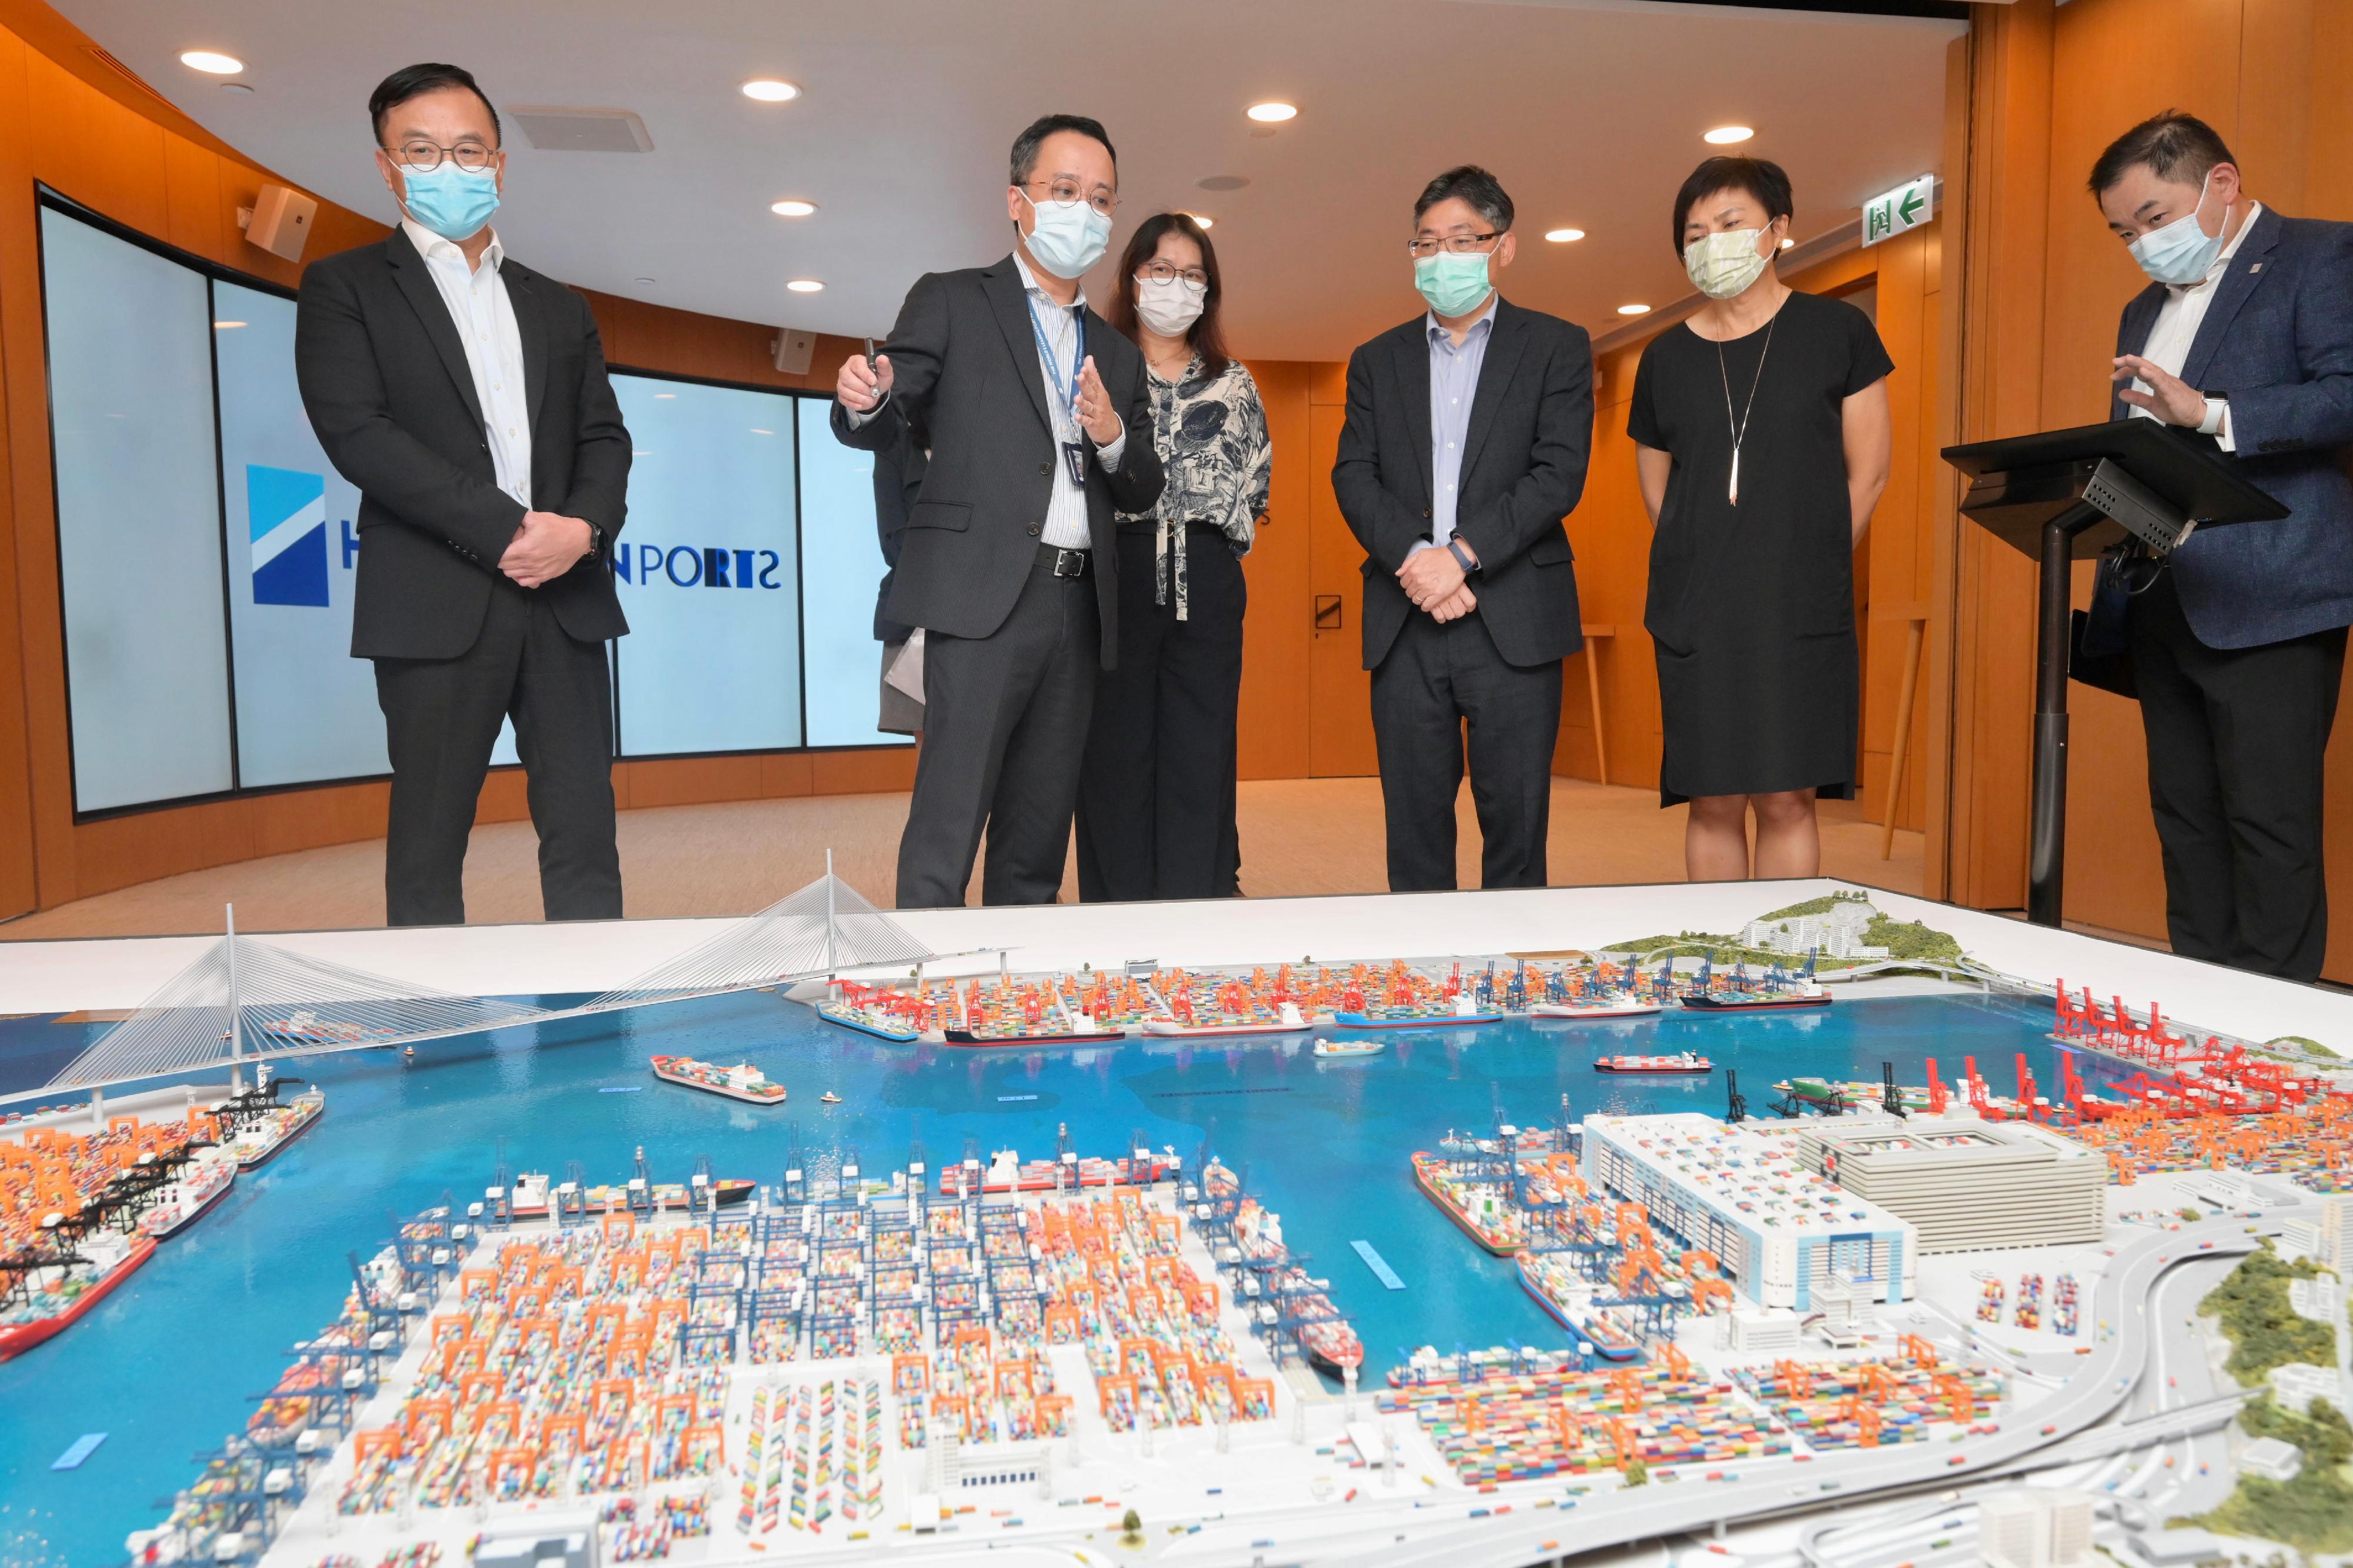 The Secretary for Transport and Logistics, Mr Lam Sai-hung, visited the Kwai Tsing Container Terminals (KTCT) today (July 19). Photo shows Mr Lam (third right), accompanied by the Chairman of the Hong Kong Container Terminal Operators Association, Ms Jessie Chung (second right), being briefed by the representatives of the operators of the KTCT on the operation of the terminals.